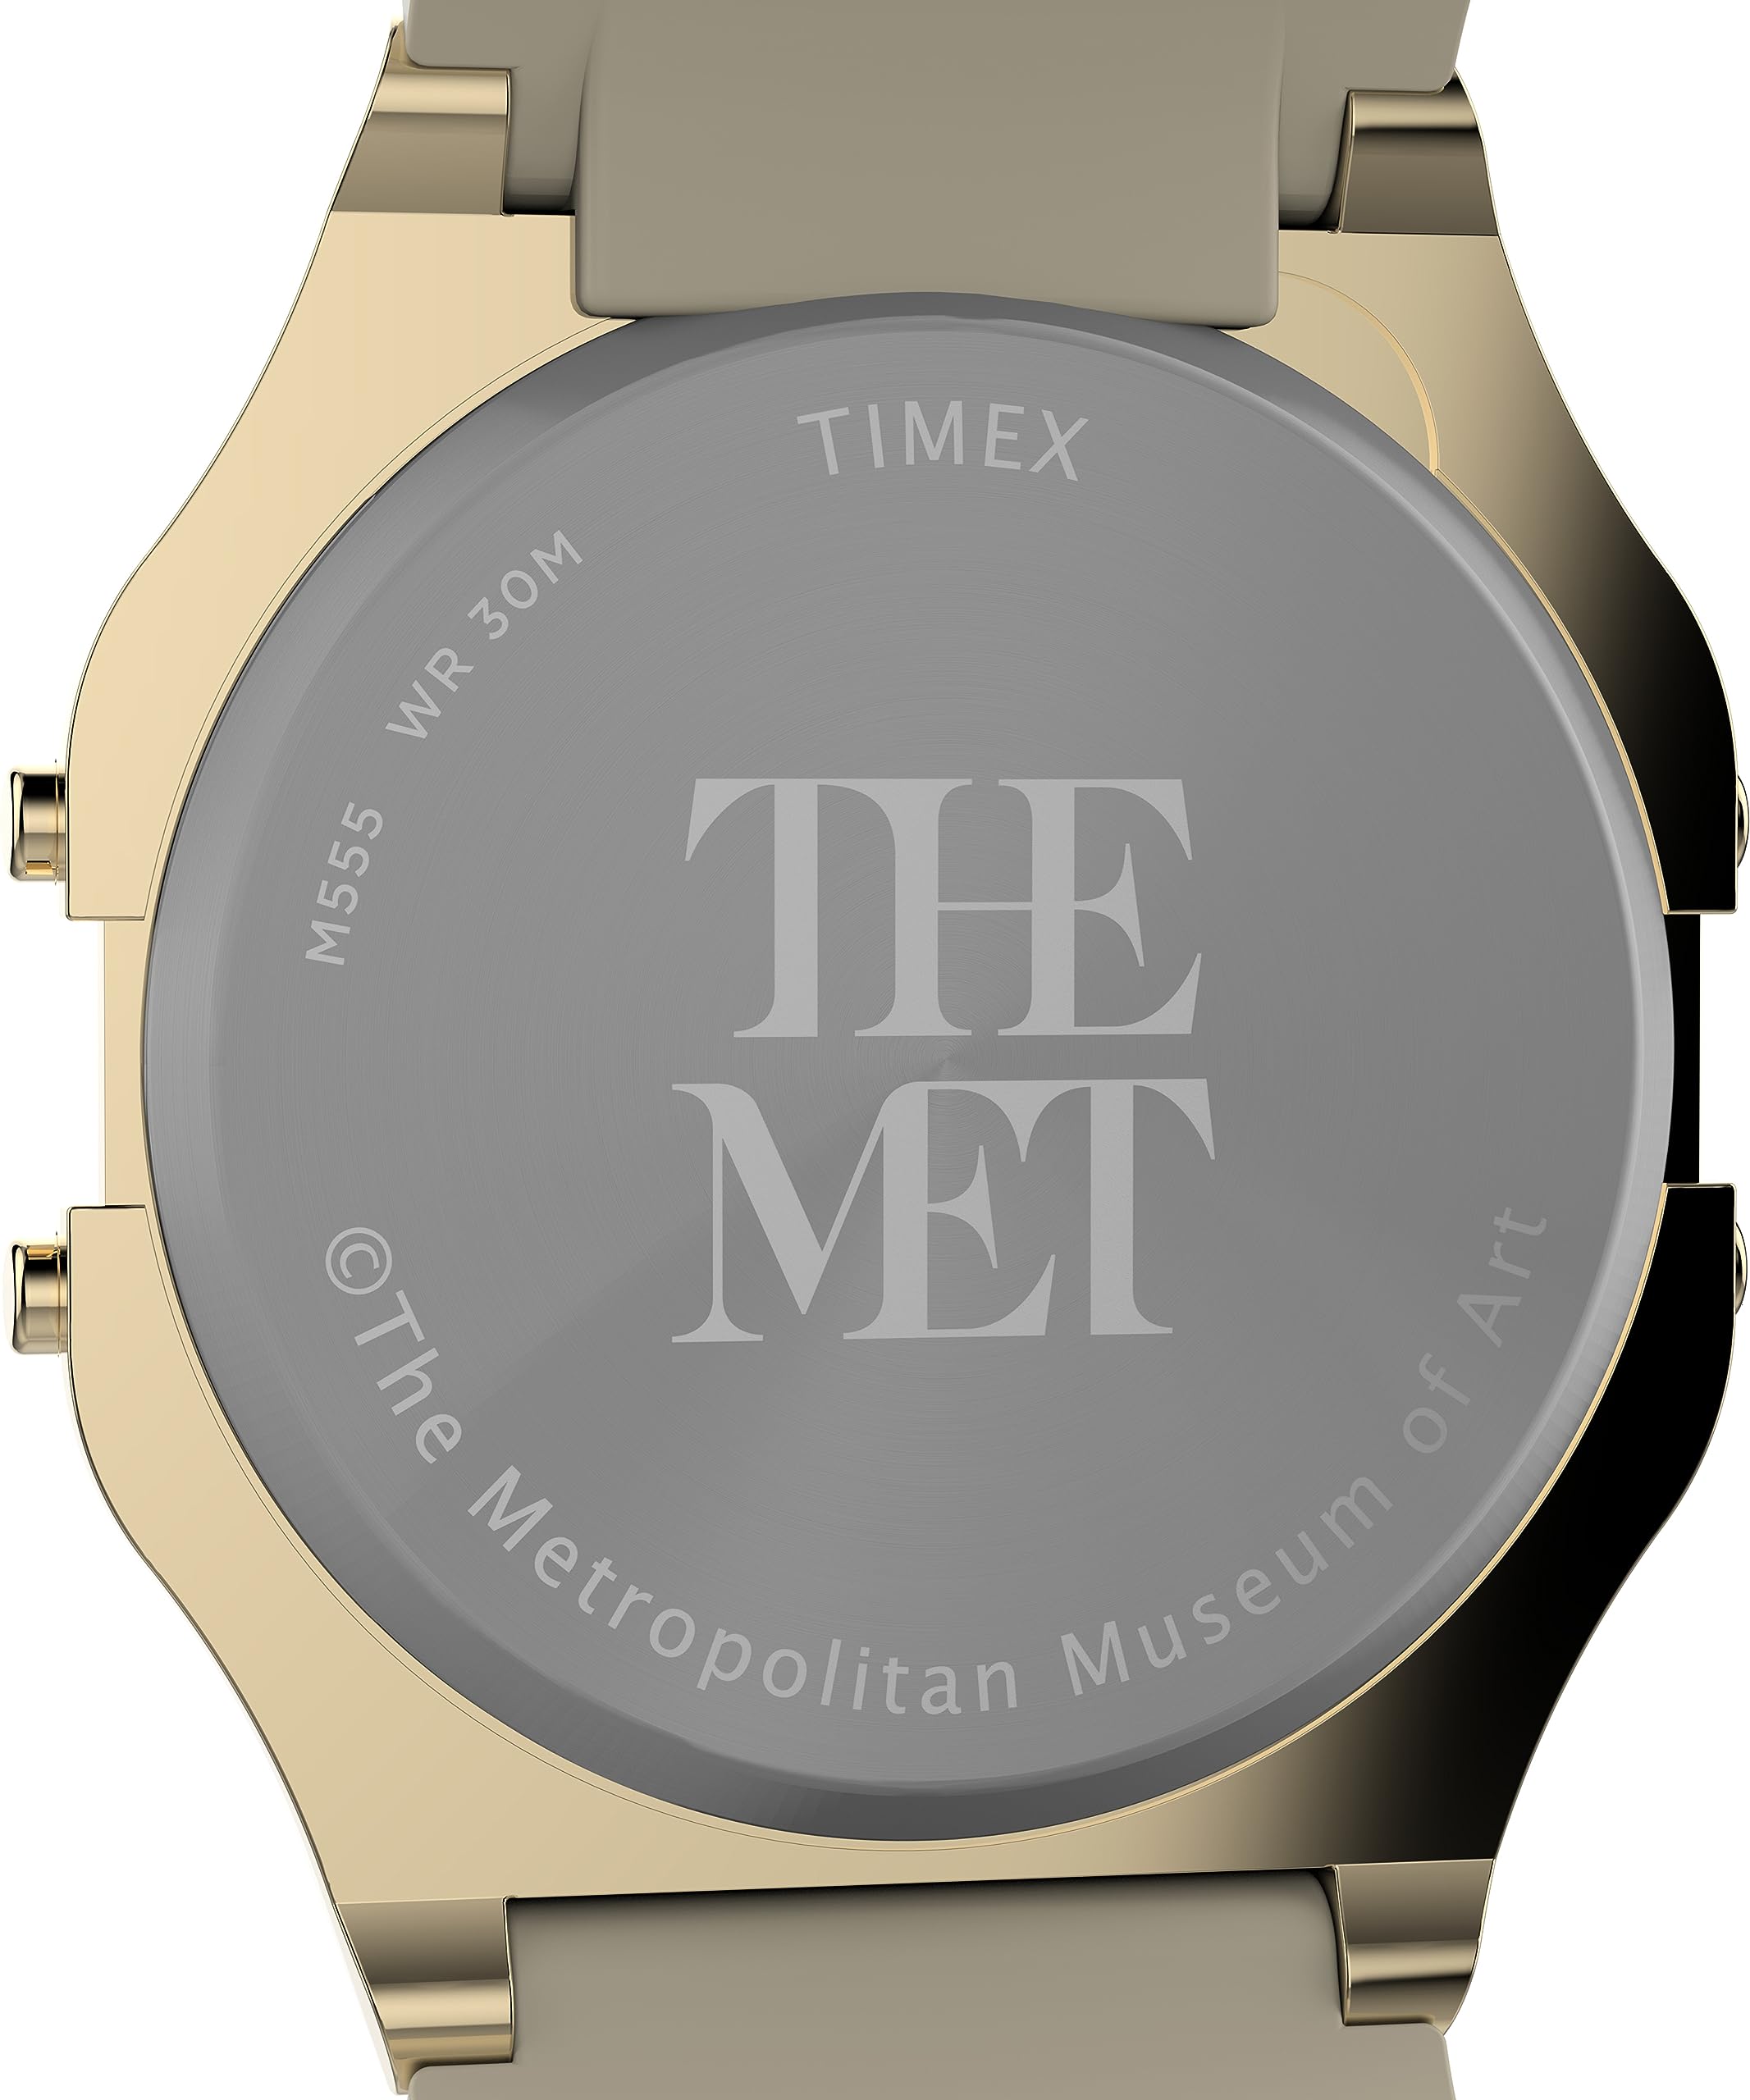 Timex 34 mm The Met Hokusai Watch